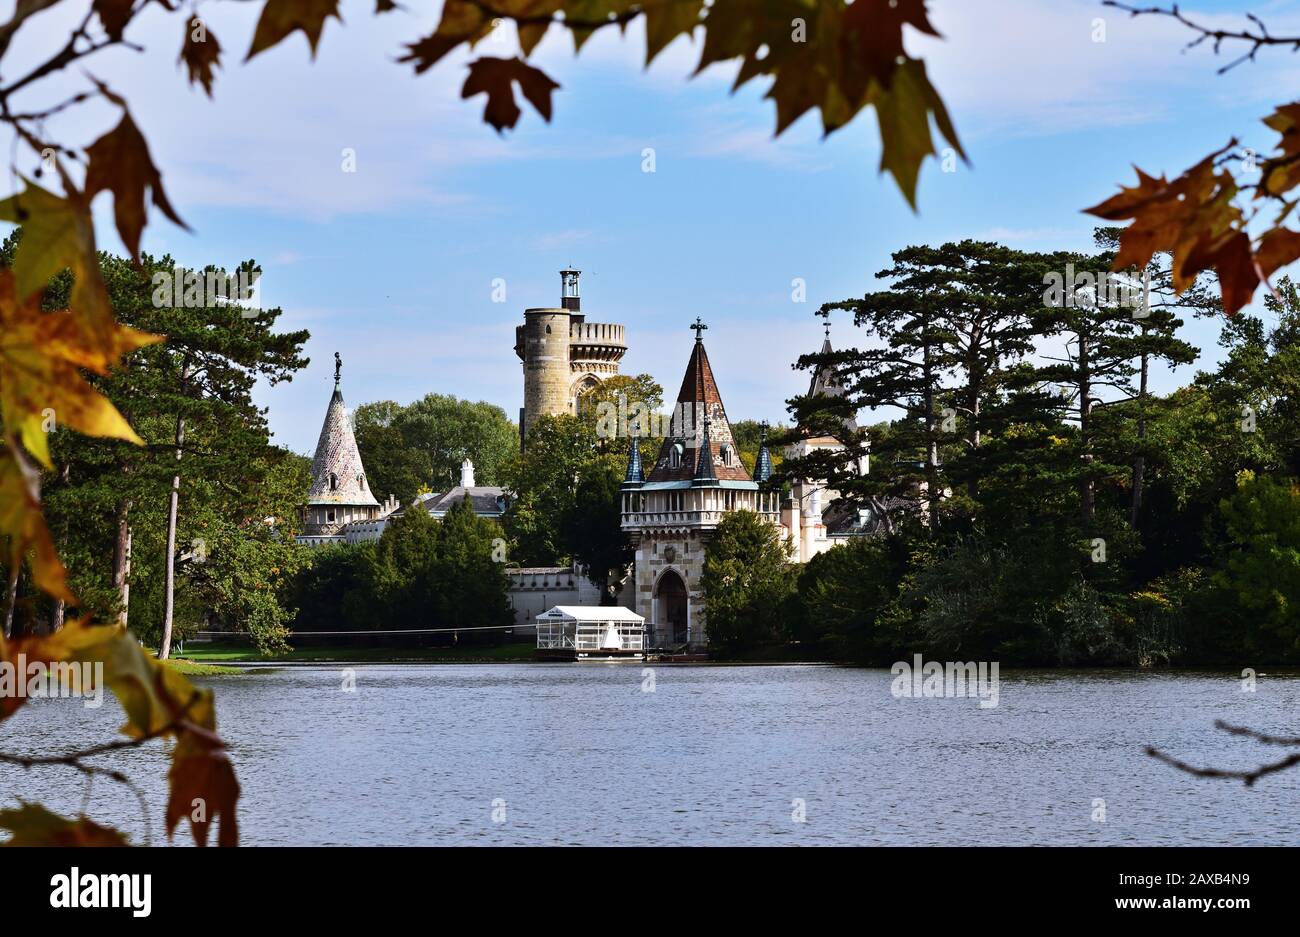 Franzensburg Castle in Laxenburg Palace park, on an island of the artificial pond. Laxenburg is a small town in Lower Austria, close to Vienna. Stock Photo